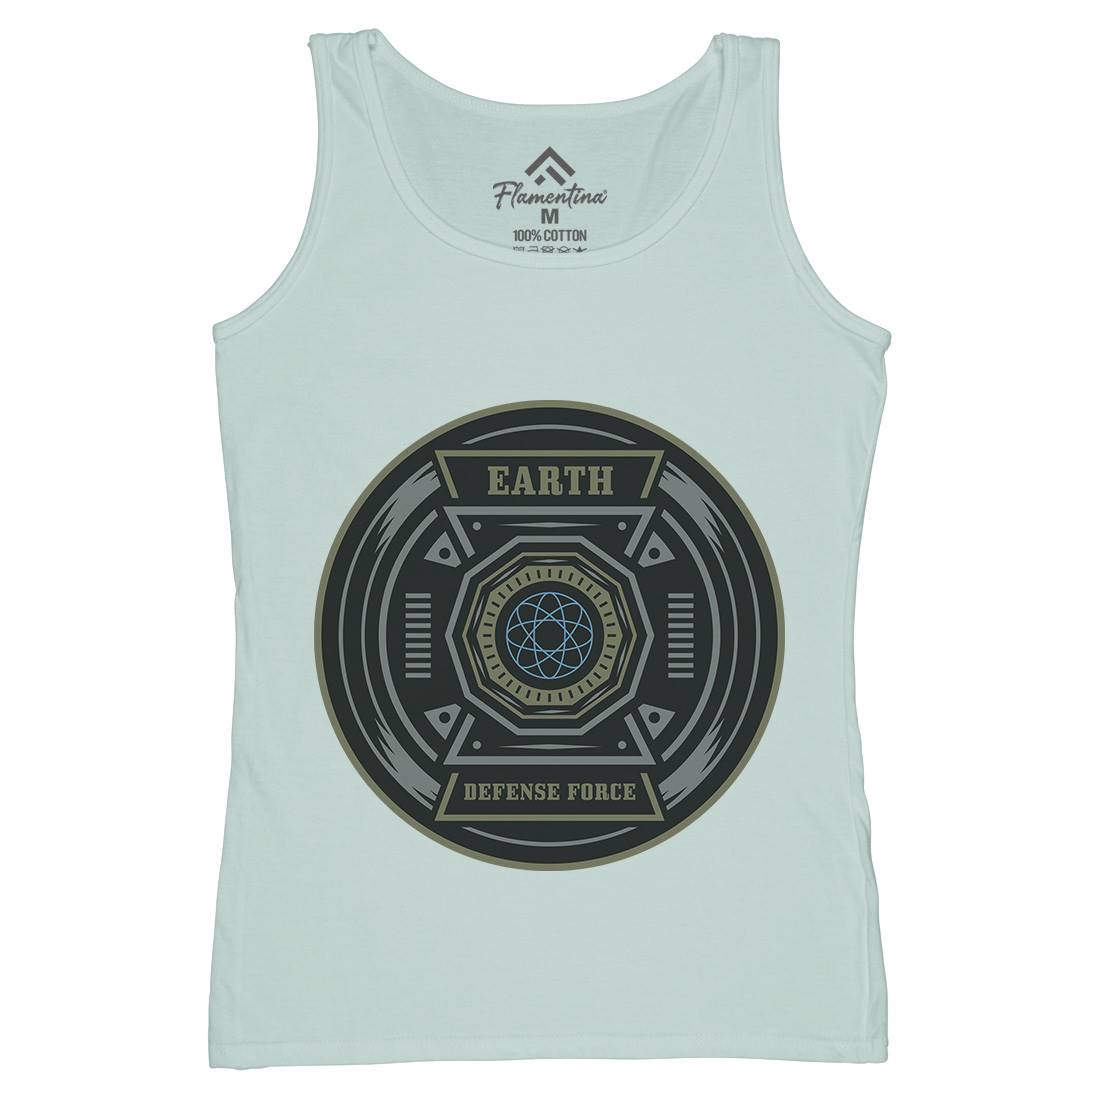 Earth Defence Force Womens Organic Tank Top Vest Space A311